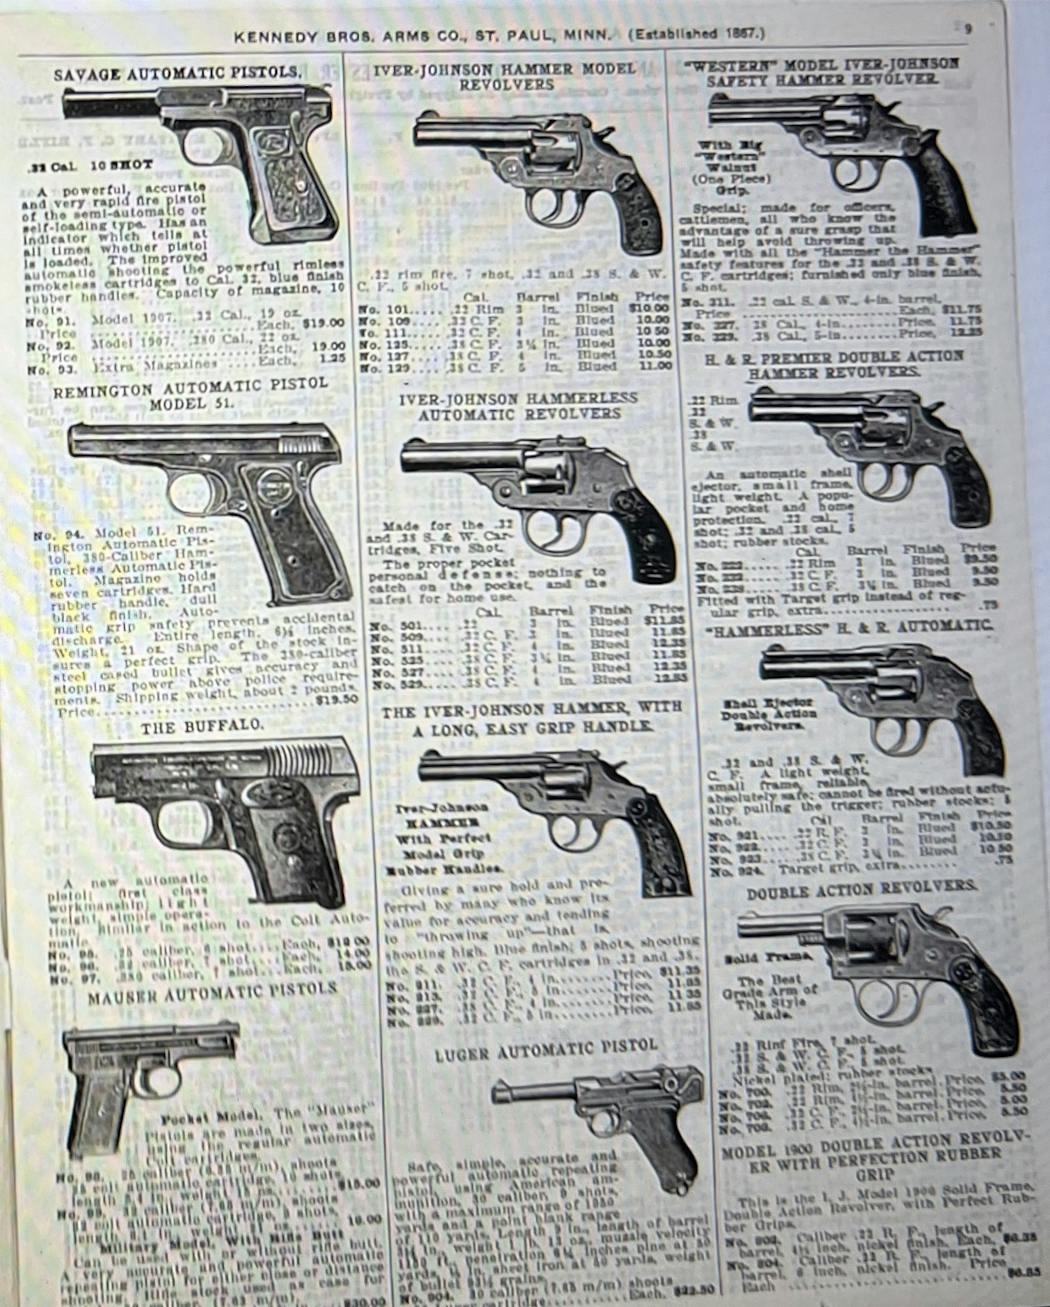 A page from the Kennedy Bros. Arms Co. of St. Paul catalog in the early 1900s, when guns were sold through the mail.